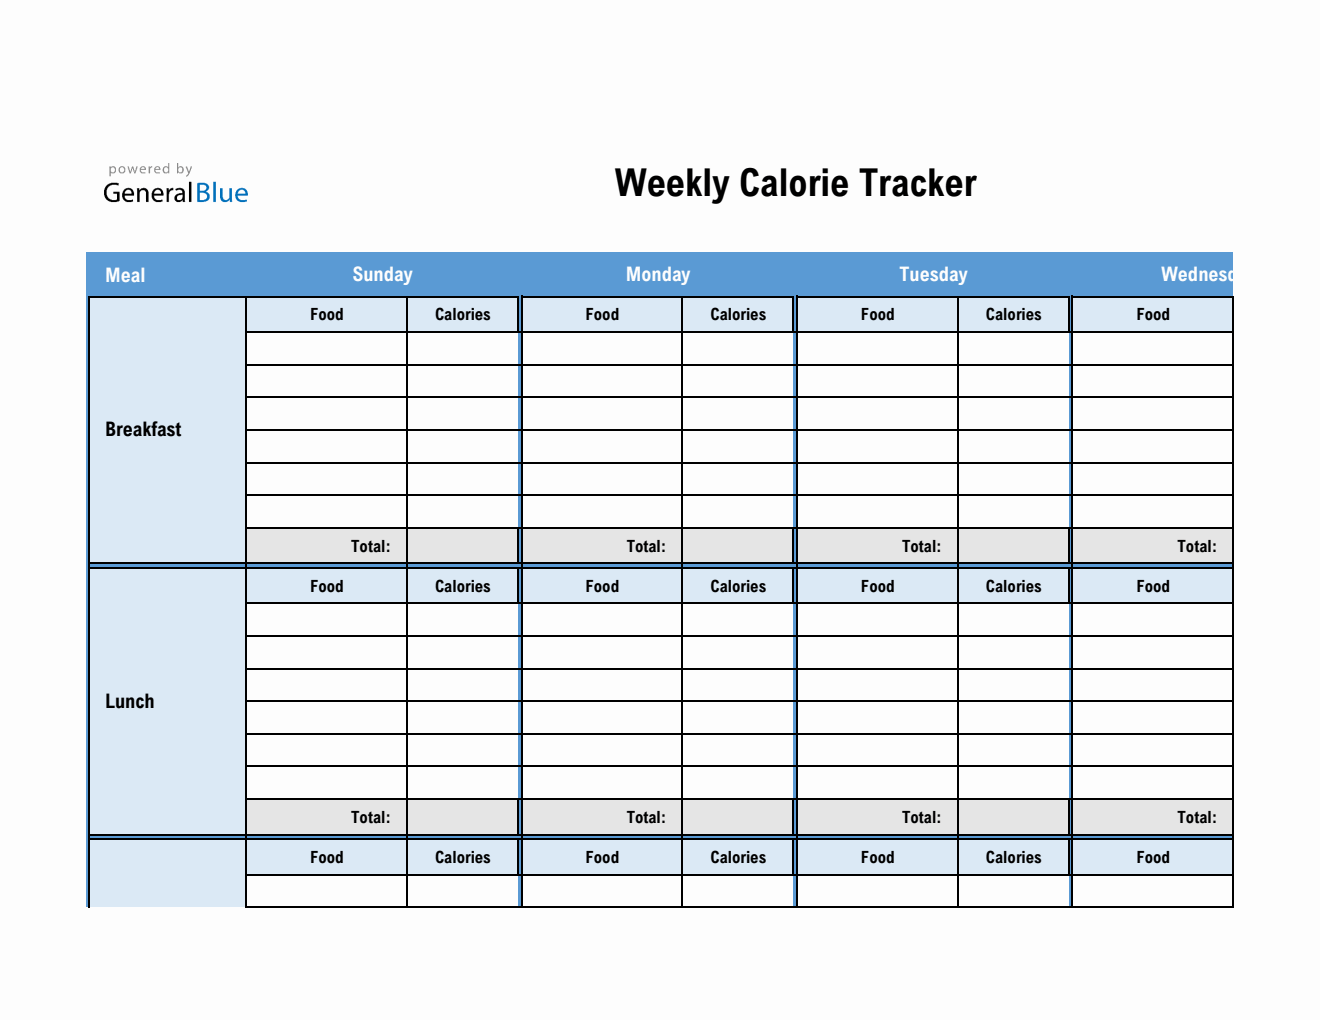 https://www.generalblue.com/weekly-calorie-tracker/p/t9rd3m2w2/f/basic-weekly-calorie-tracker-in-excel-md.png?v=dba8c26be4ea8e67996756ed5529709a